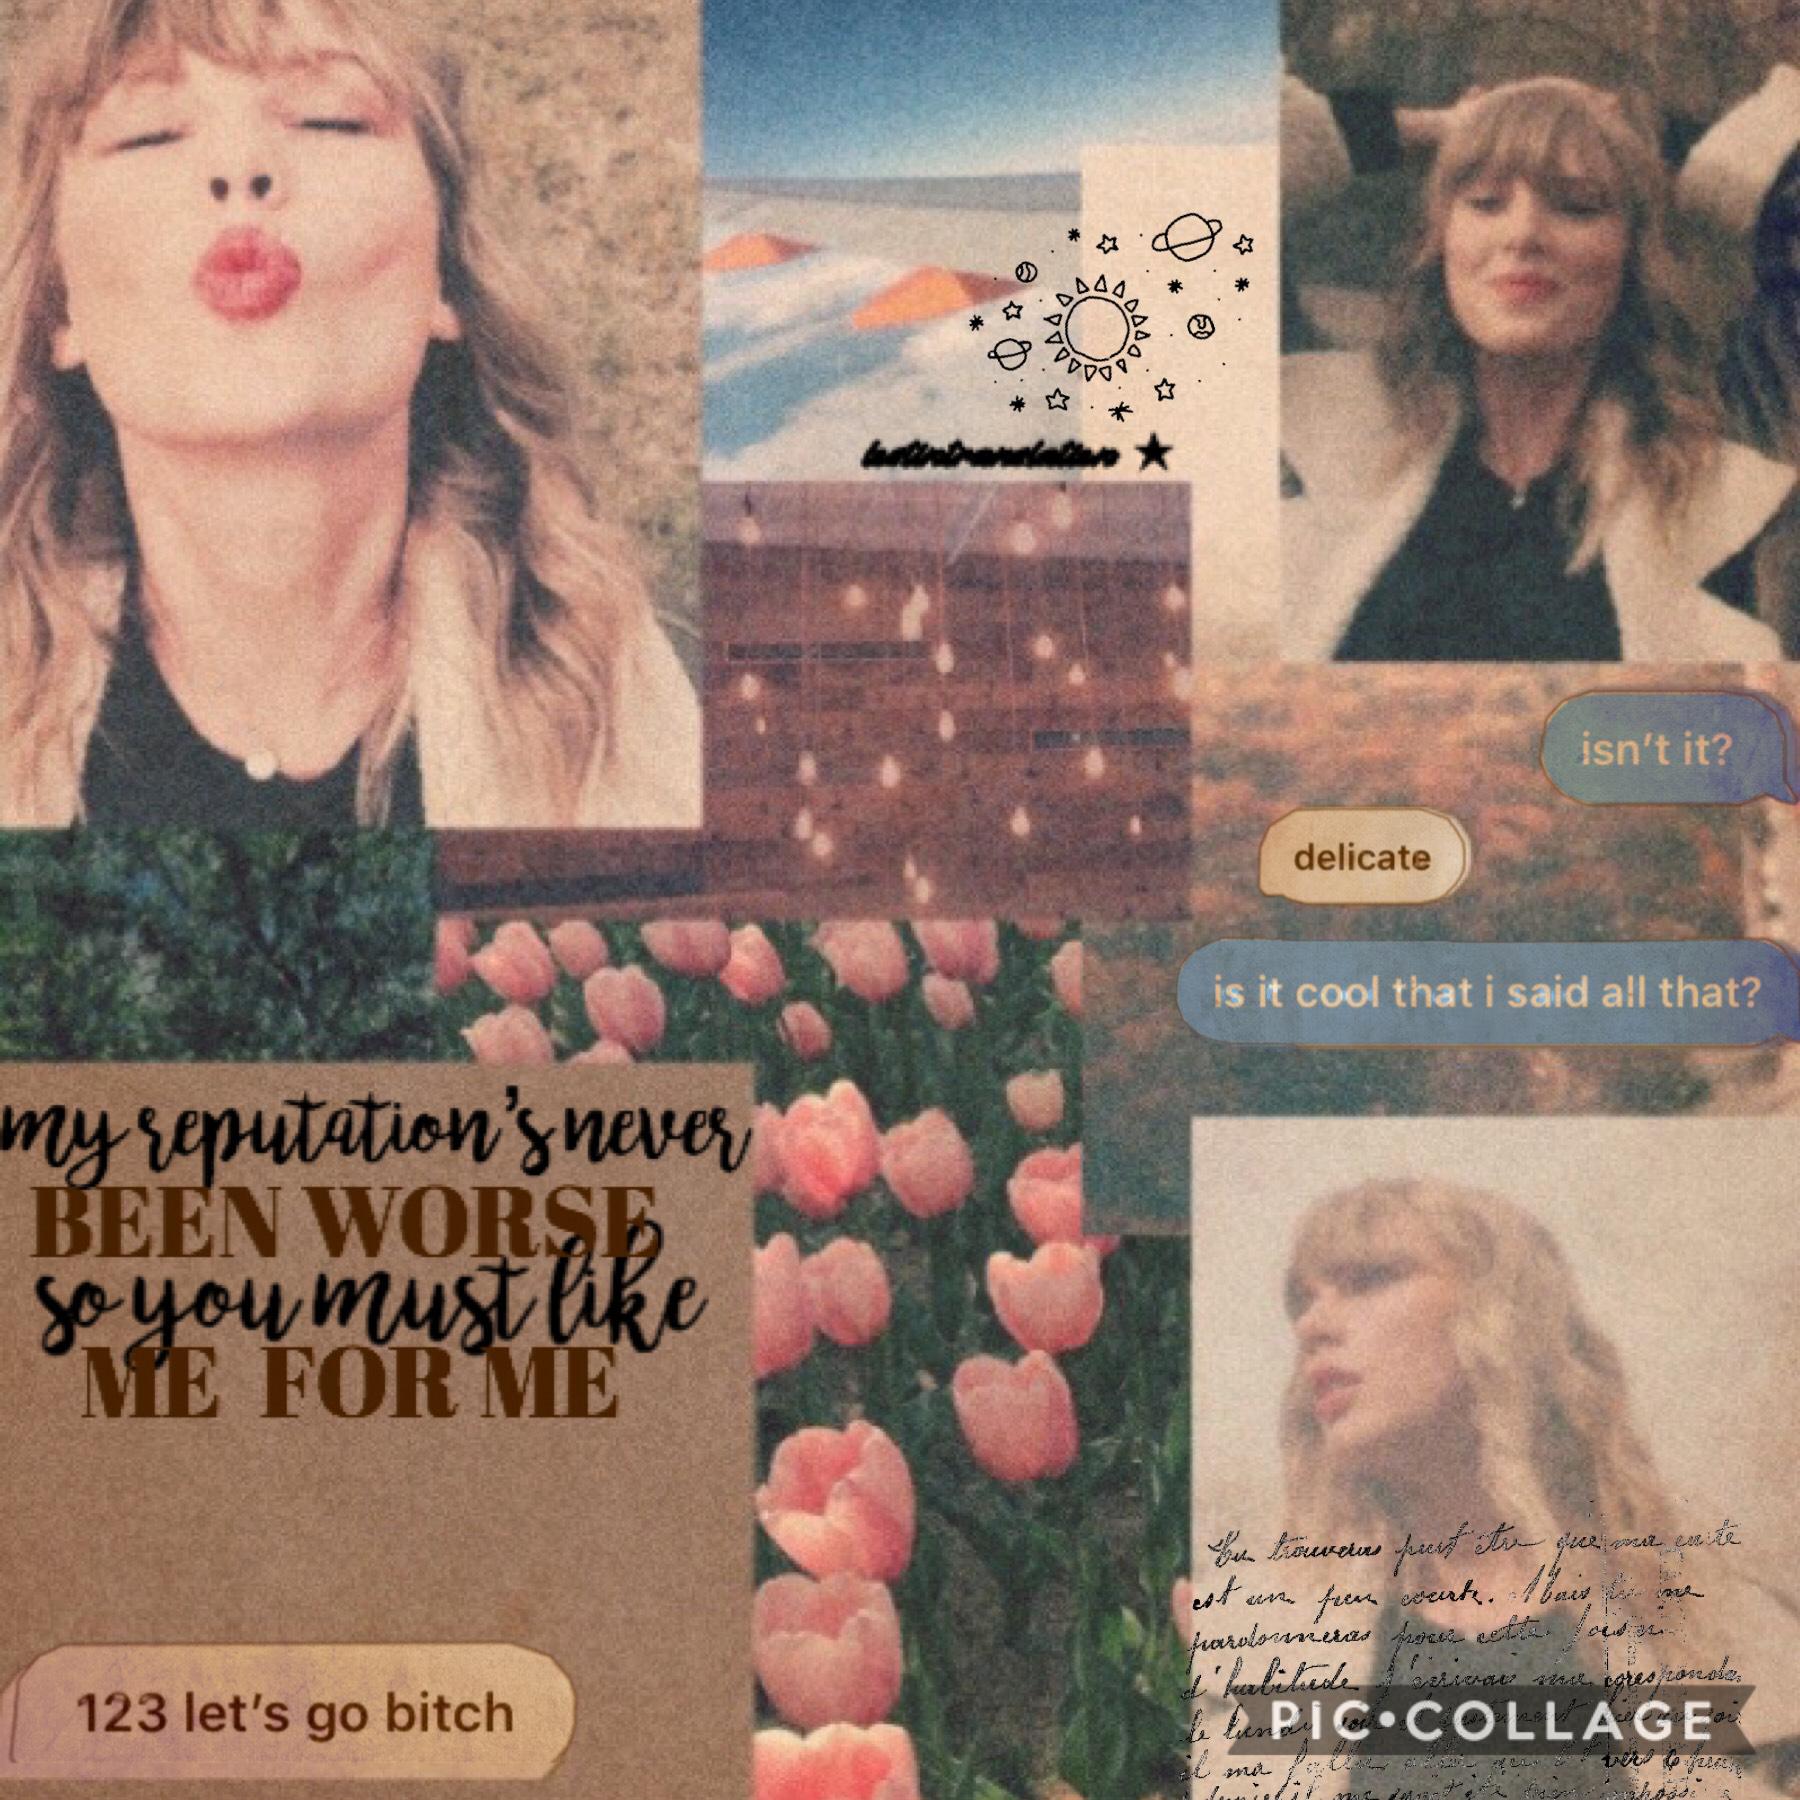 tappp 🧡
hey! made this for a games i’m in! 
i’ve been listening to delicate a lot...
how are y’all? 
i miss you
love you kiddos 🤠💘
QOTD: what’s the most interesting thing you’ve done this week?
AOTD: i did a cheerleading, stunt course! 